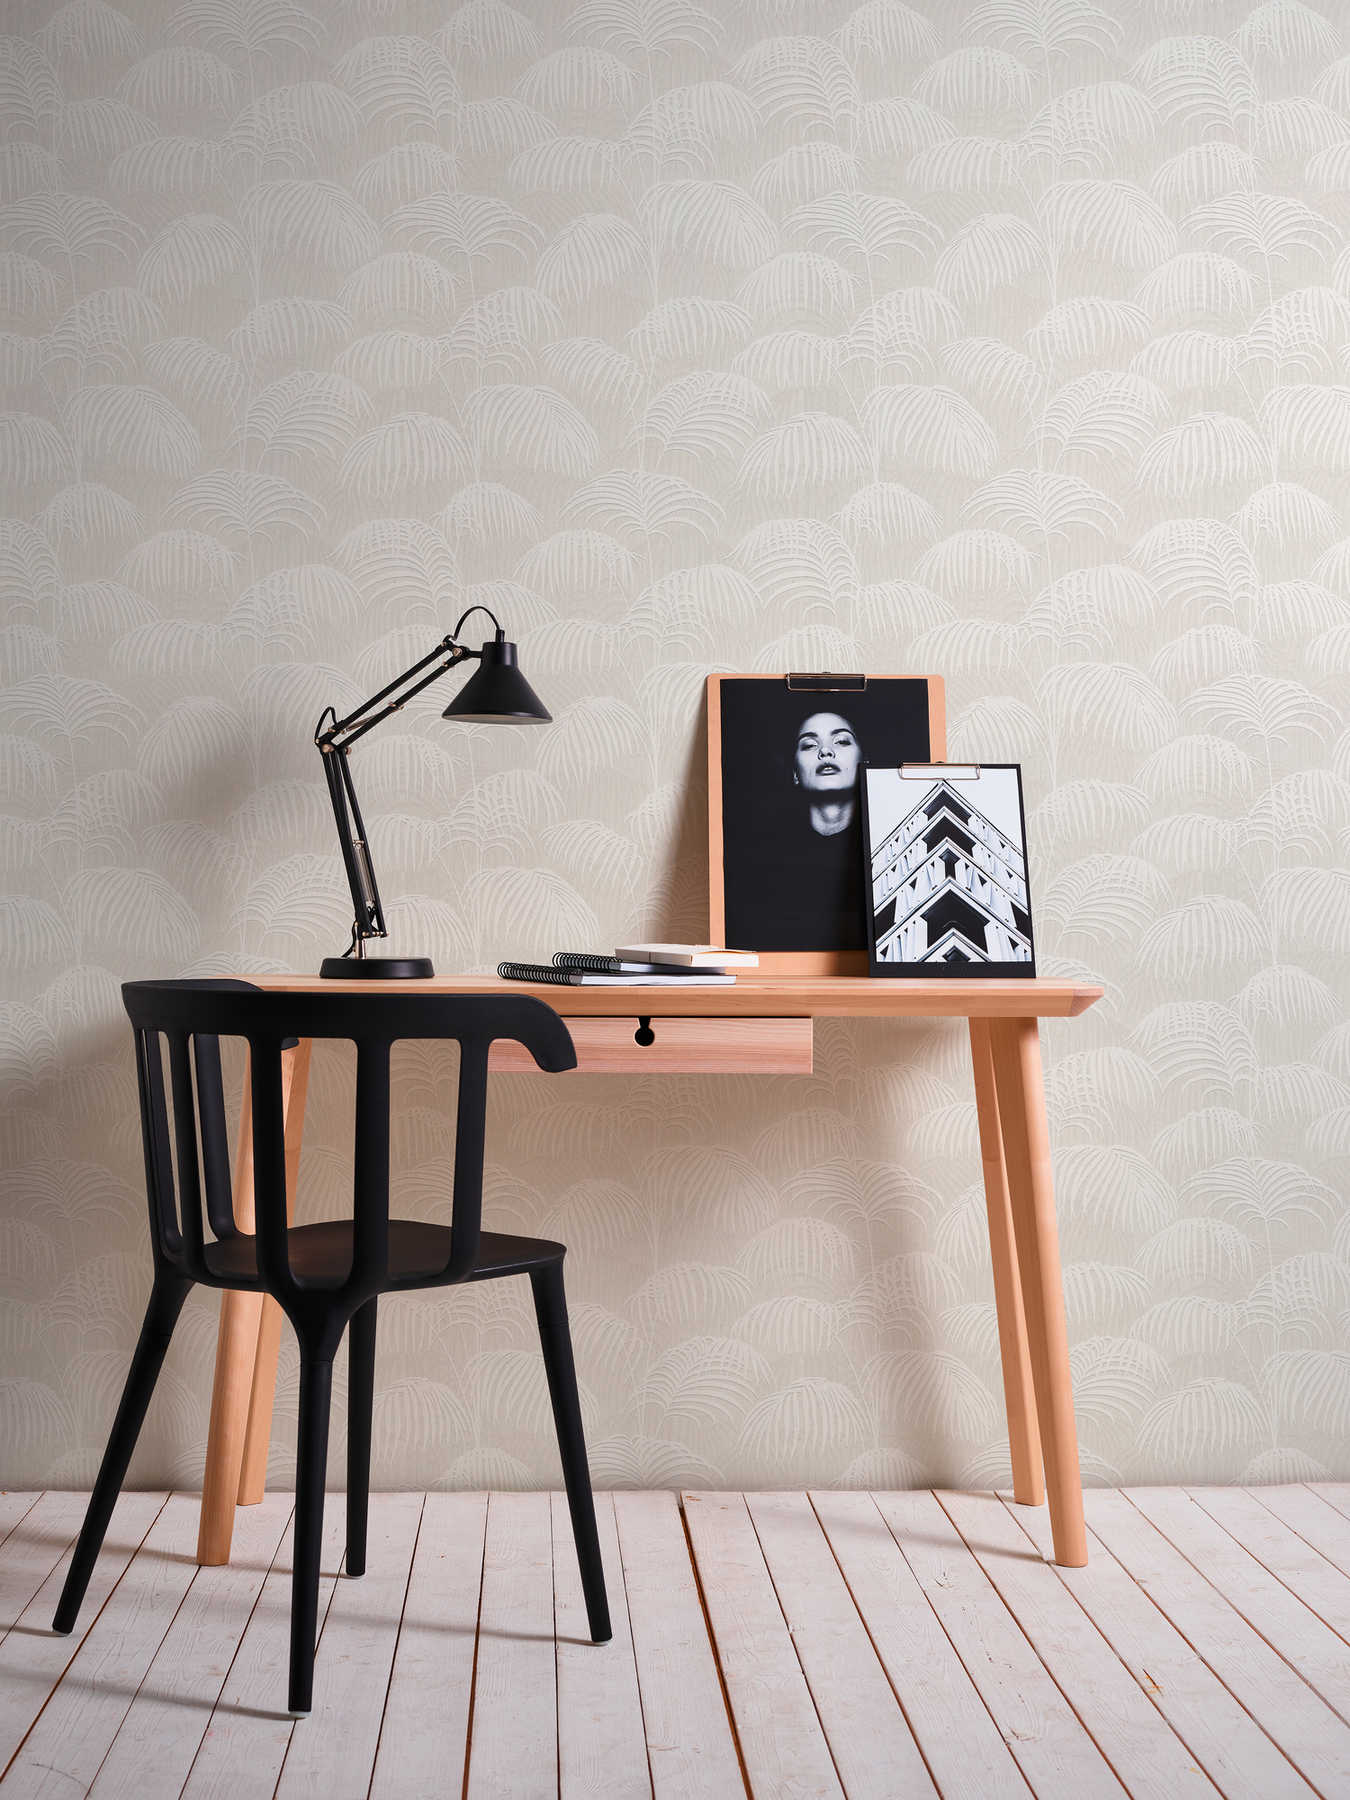             Leaves wallpaper with ferns & 3D structure - cream
        